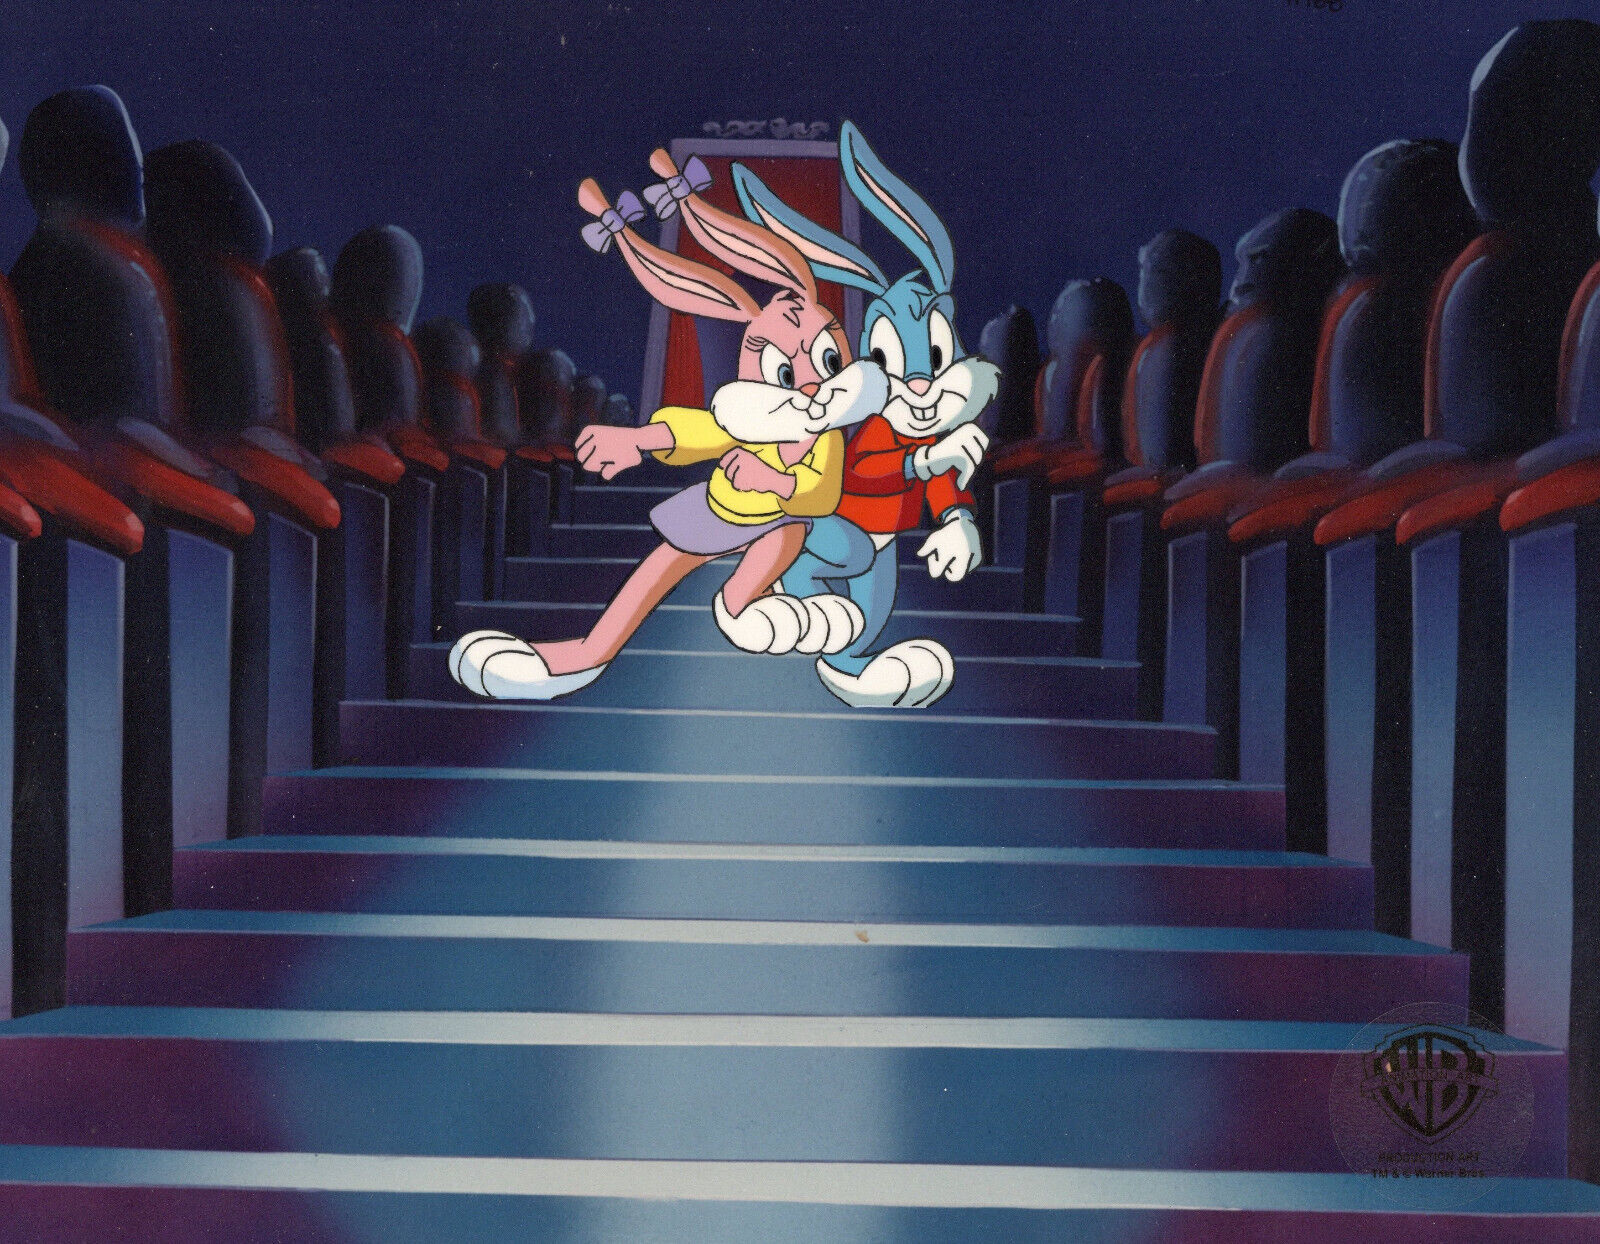 Tiny Toons Adventures-Original Prod Cel-Babs/Buster Bunny-Weekday Afternoon Live